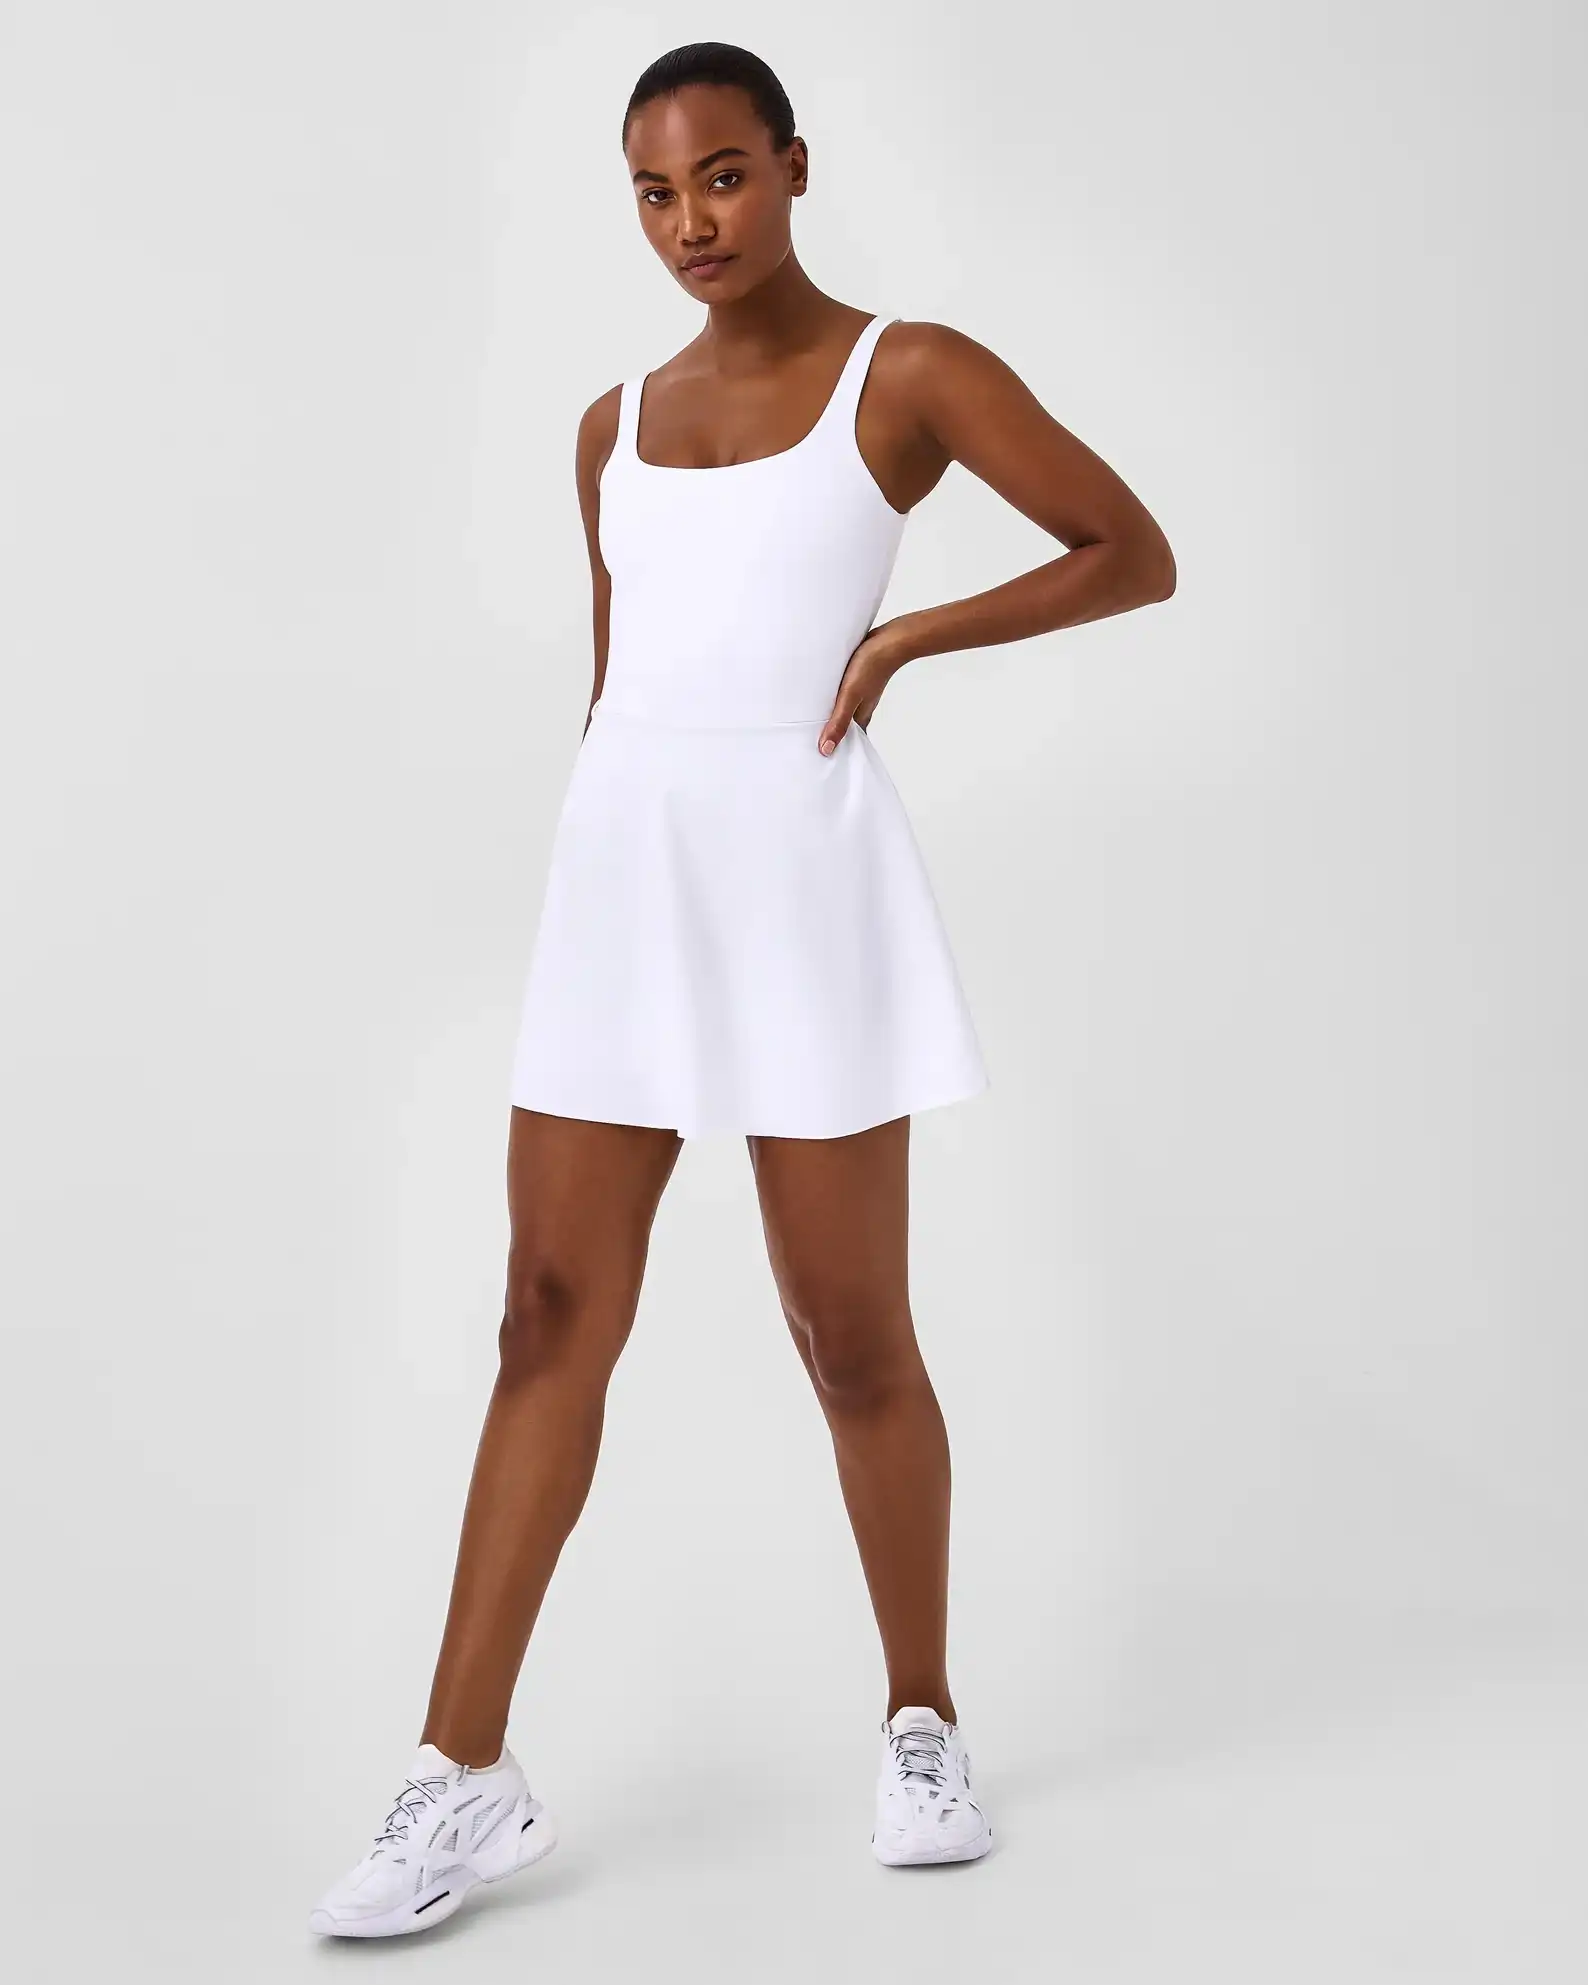 The Get Moving Easy Access Square Neck Dress